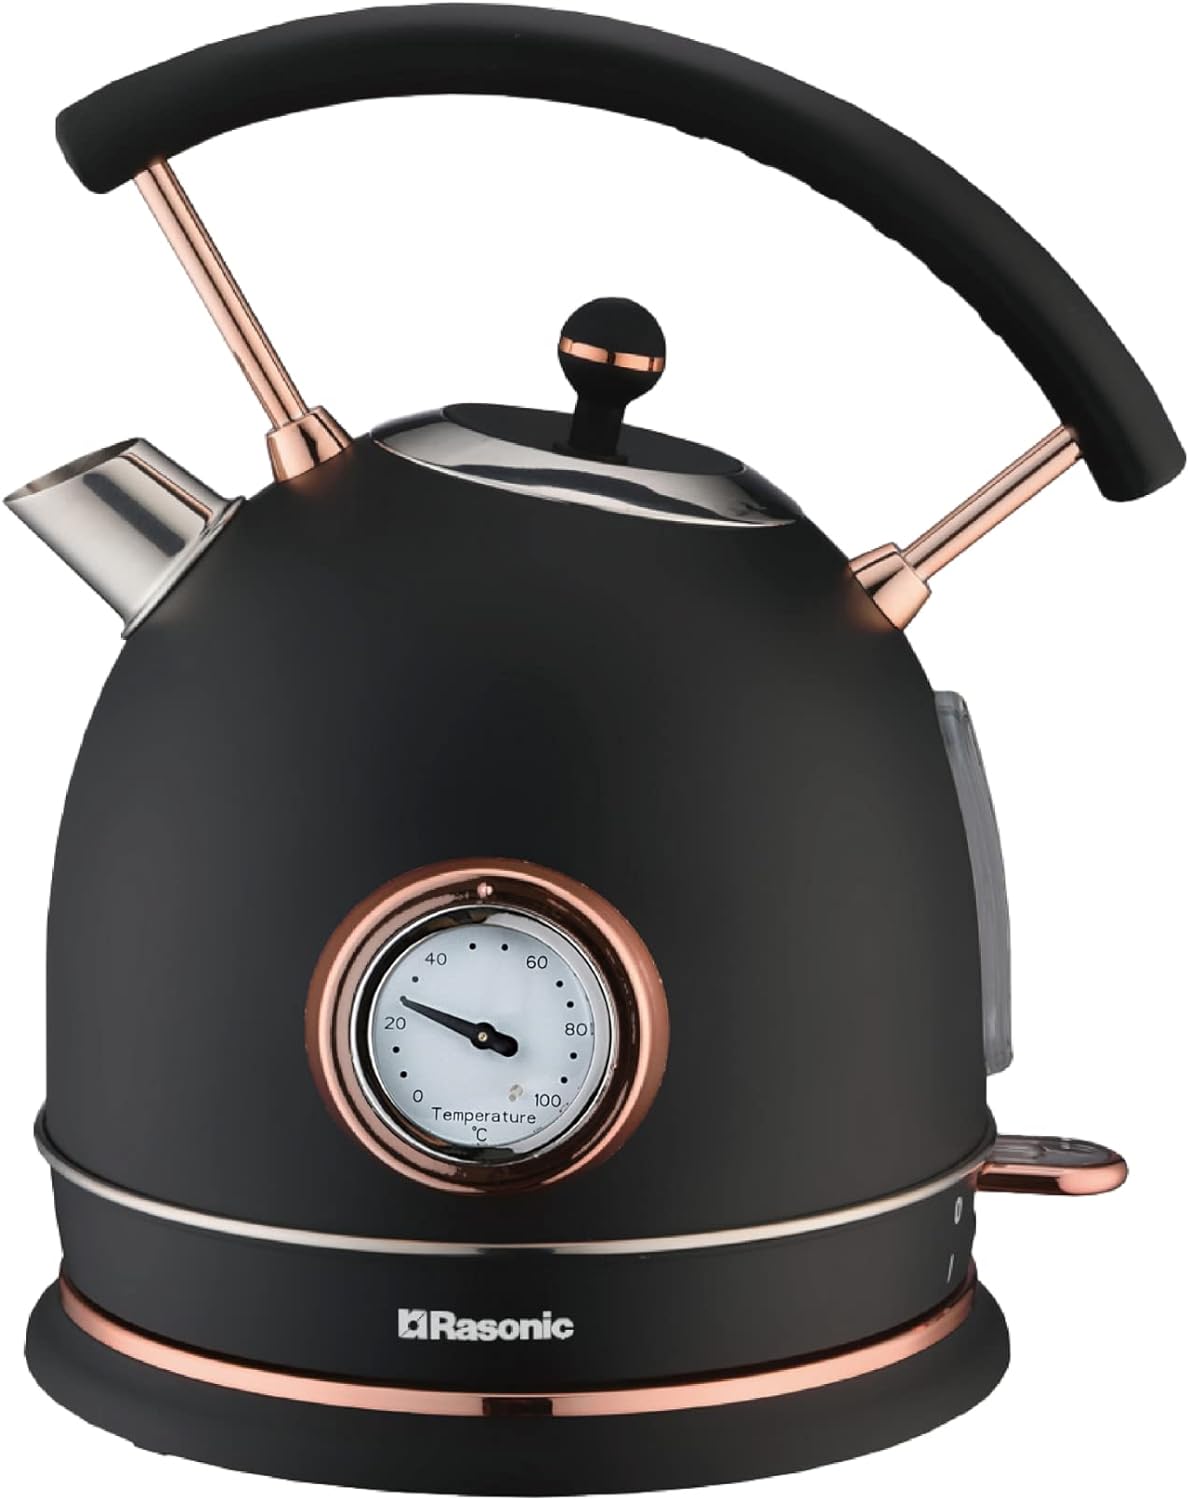 Rasonic Classic Retro Electric Kettle 1.8L Stainless Steel, 3KW Fast Quiet Boiling, Temperature Gauge, LED Light, Auto Shut - Off, Home Kitchen, Office, Luxurious Hotel (Matt Finish Black and Rose Gold) - Amazing Gadgets Outlet